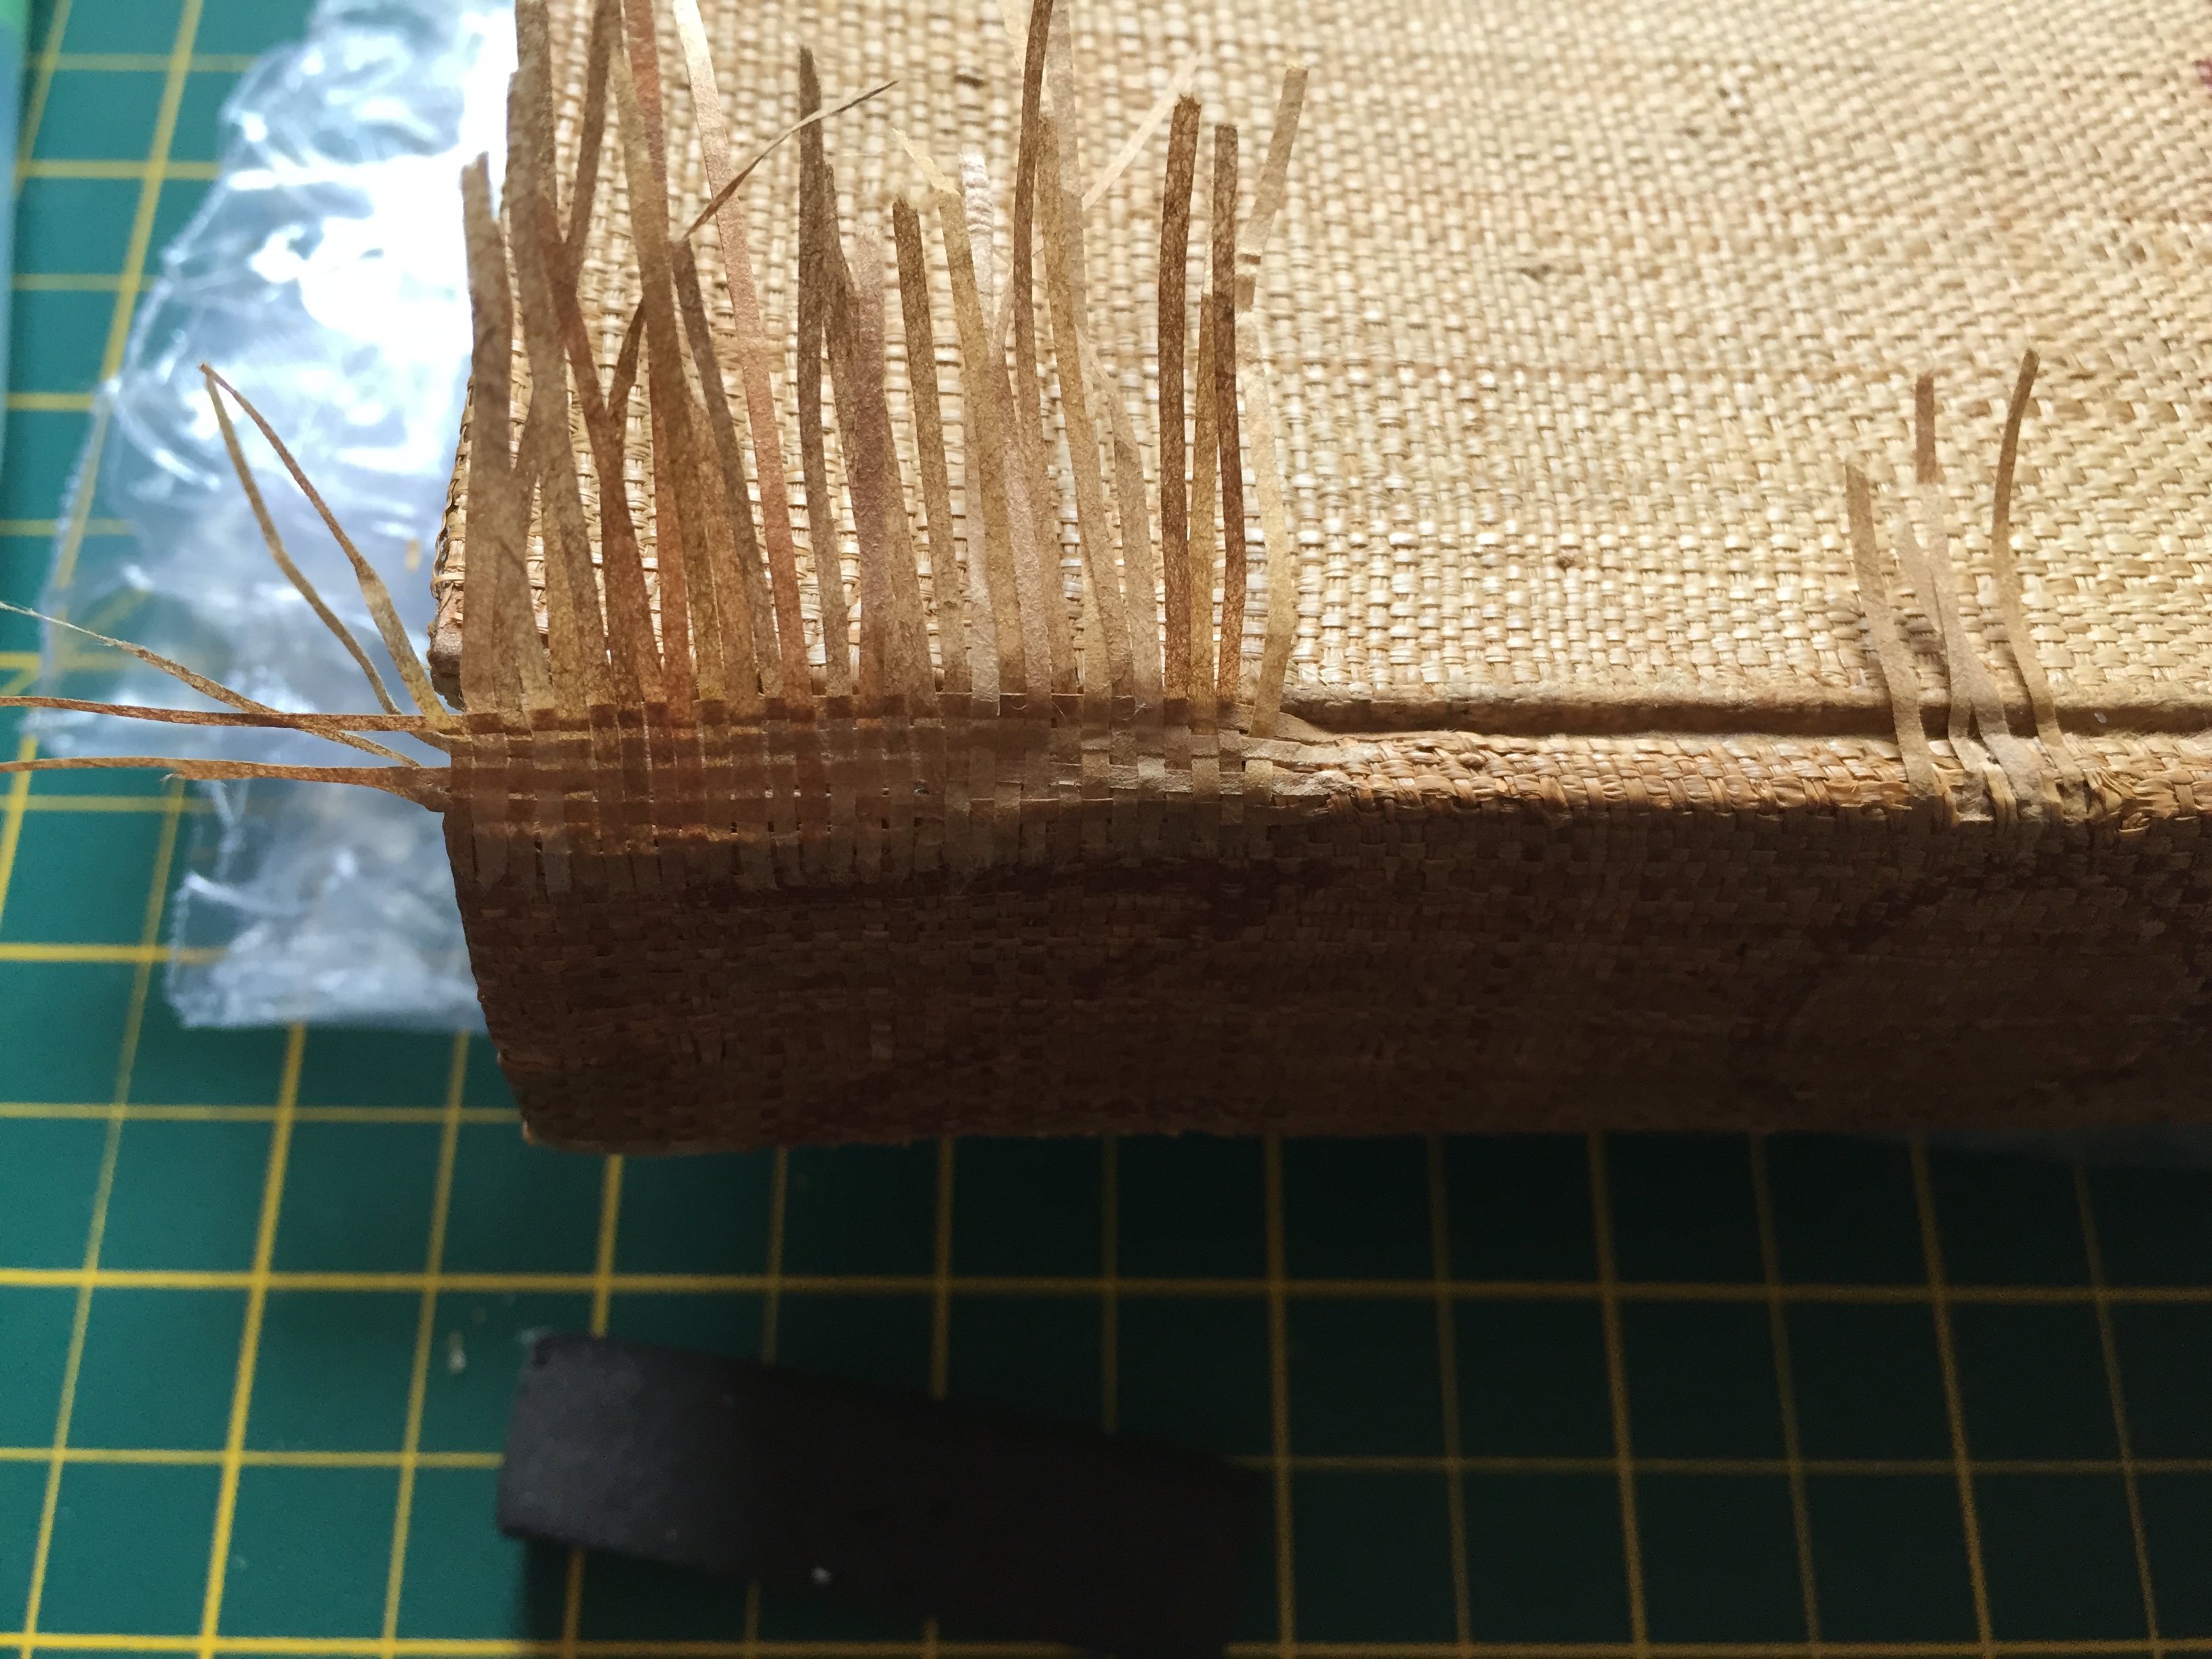 The woven infill of Japanese paper sits along the spine with the far ends left long before being stuck down.